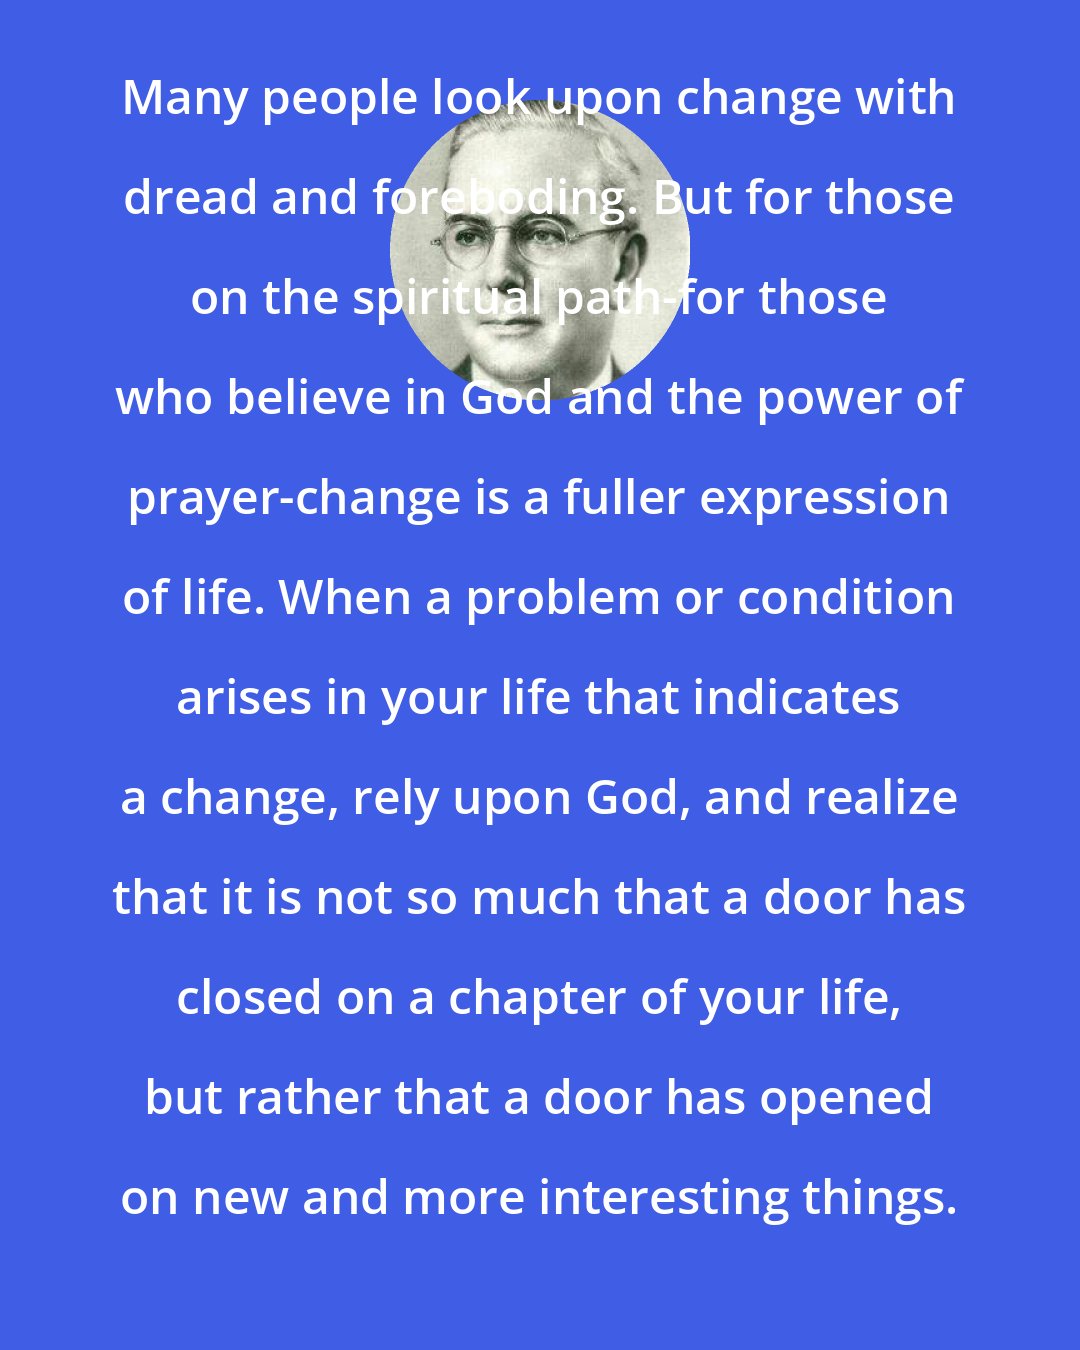 Emmet Fox: Many people look upon change with dread and foreboding. But for those on the spiritual path-for those who believe in God and the power of prayer-change is a fuller expression of life. When a problem or condition arises in your life that indicates a change, rely upon God, and realize that it is not so much that a door has closed on a chapter of your life, but rather that a door has opened on new and more interesting things.